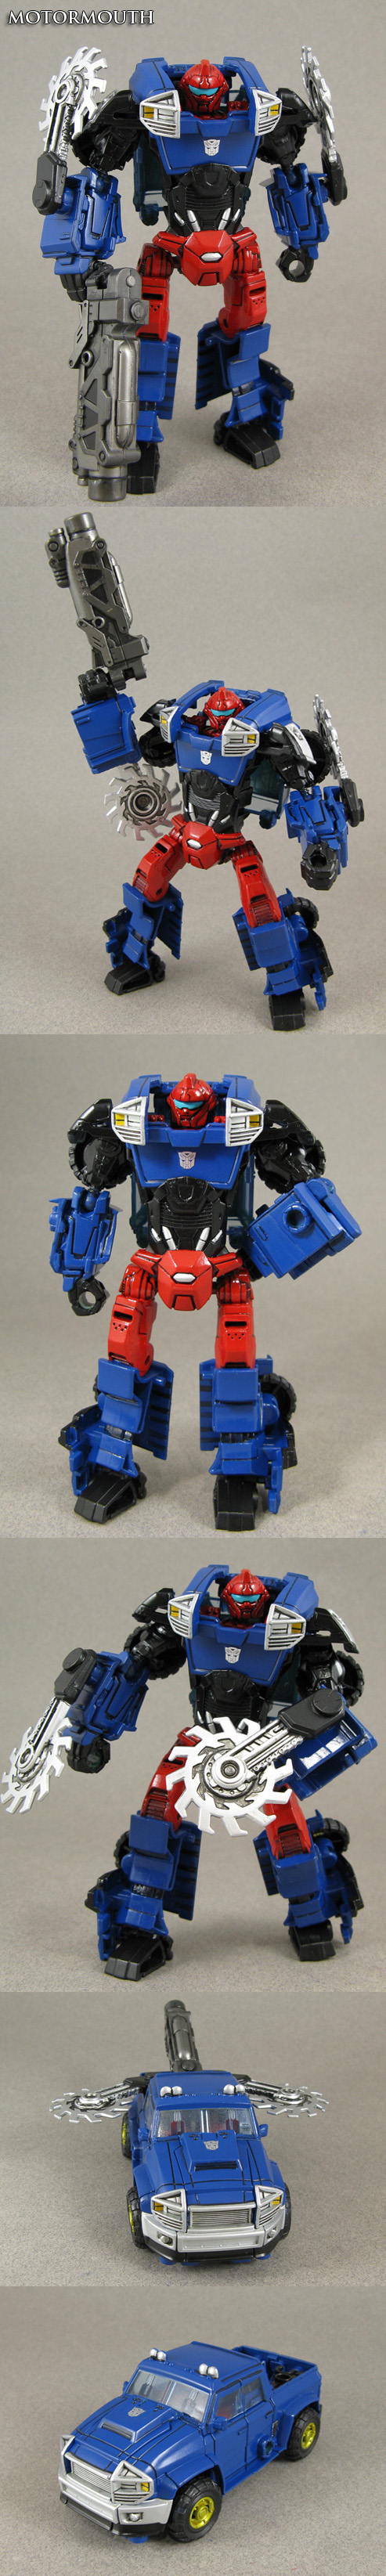 custom_transformers_g2_deluxe_motormouth_by_jin_saotome-d607eyp.jpg